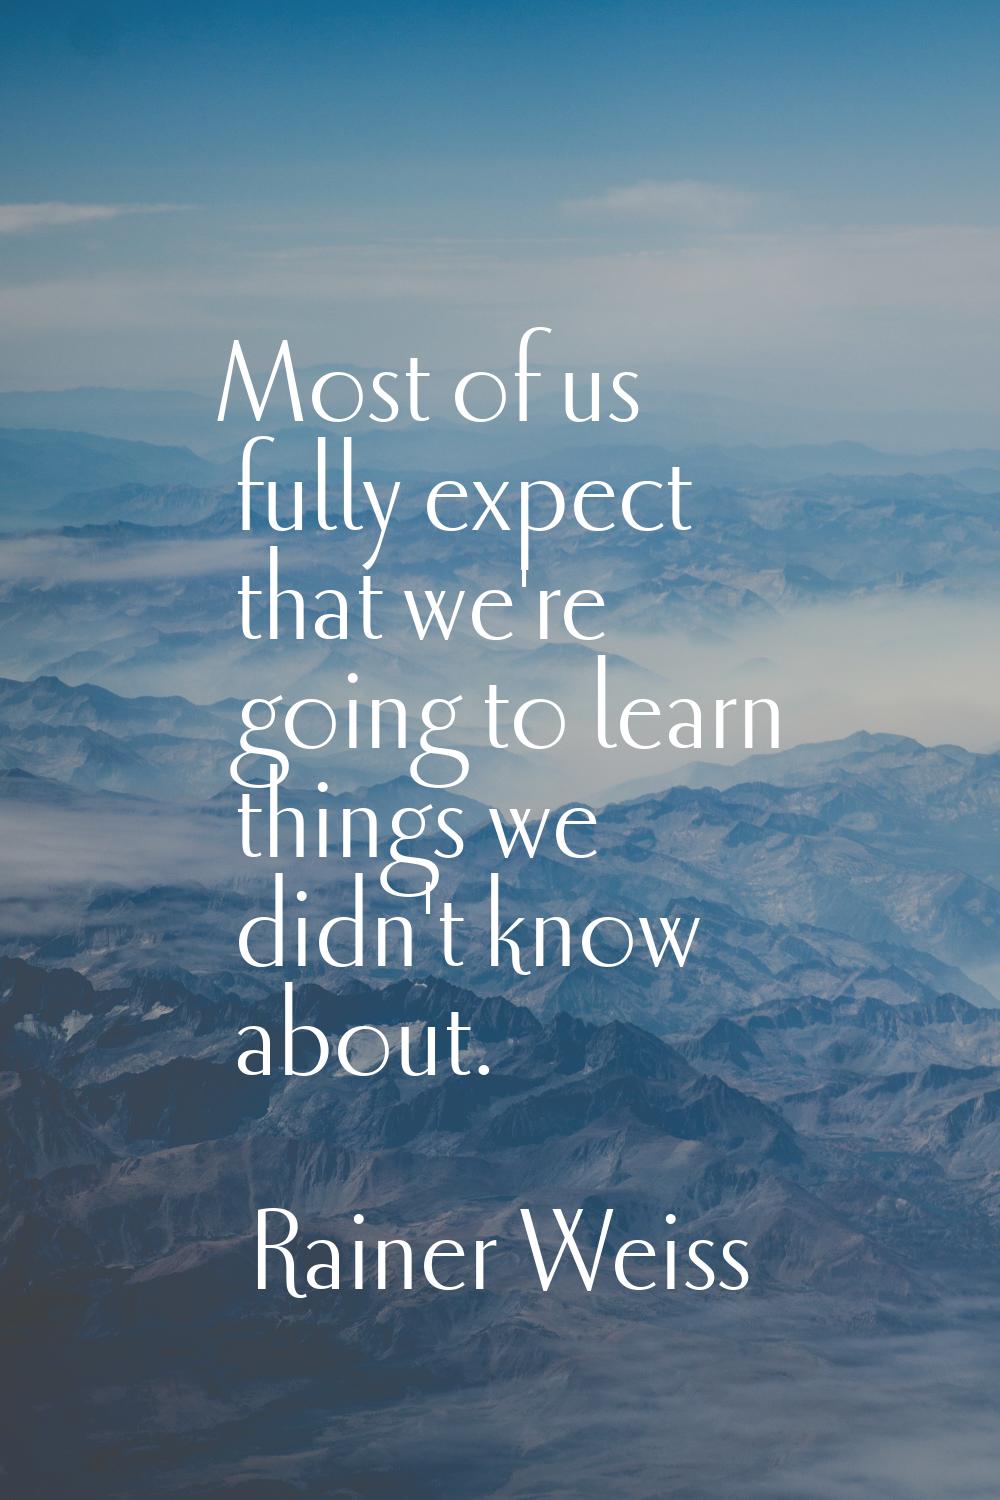 Most of us fully expect that we're going to learn things we didn't know about.